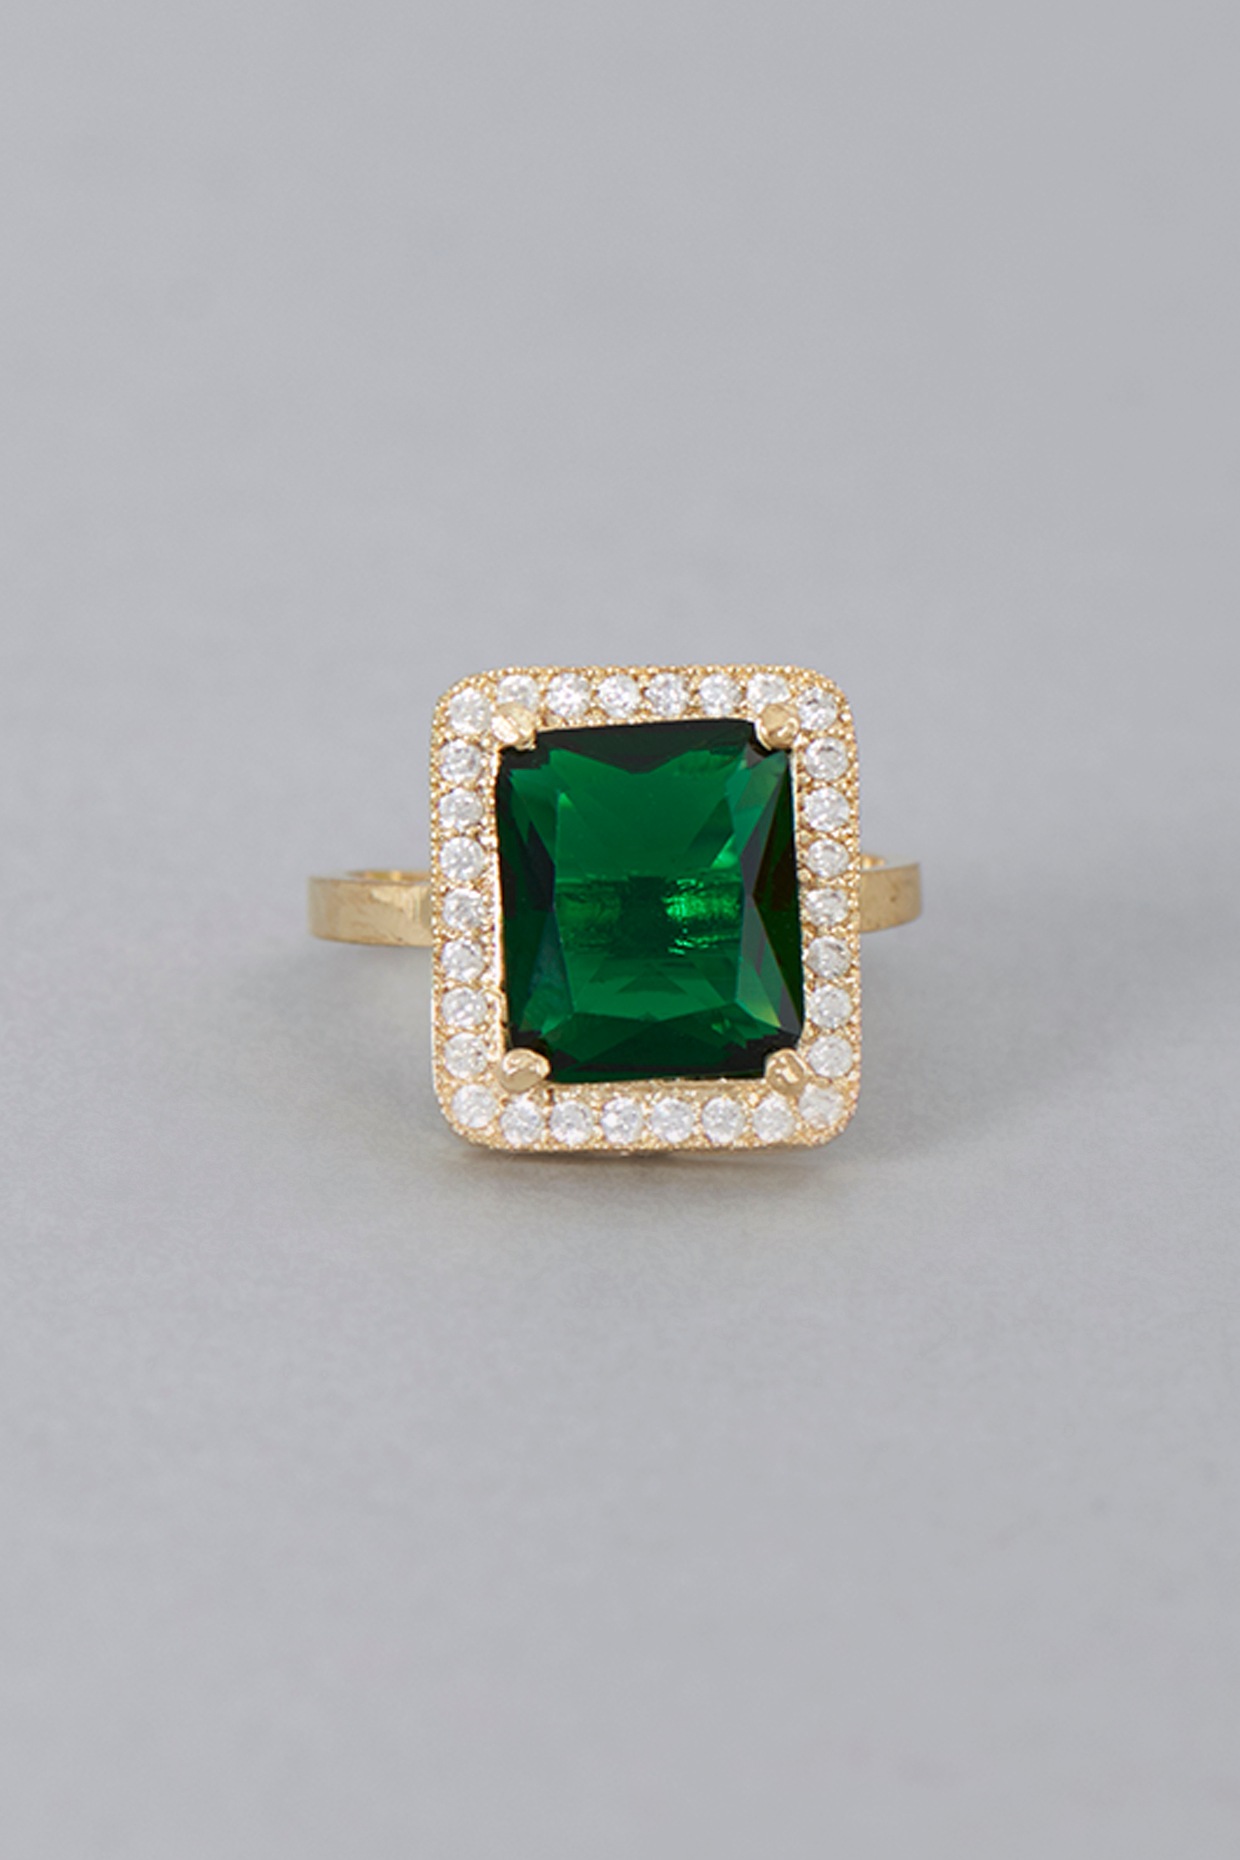 Buy Natural Emerald Gemstone Ring 925 Sterling Silver Ring Designer Emerald  Ring Large Emerald Ring May Birthstone Gift Ring Yellow Ring Online in  India - Etsy